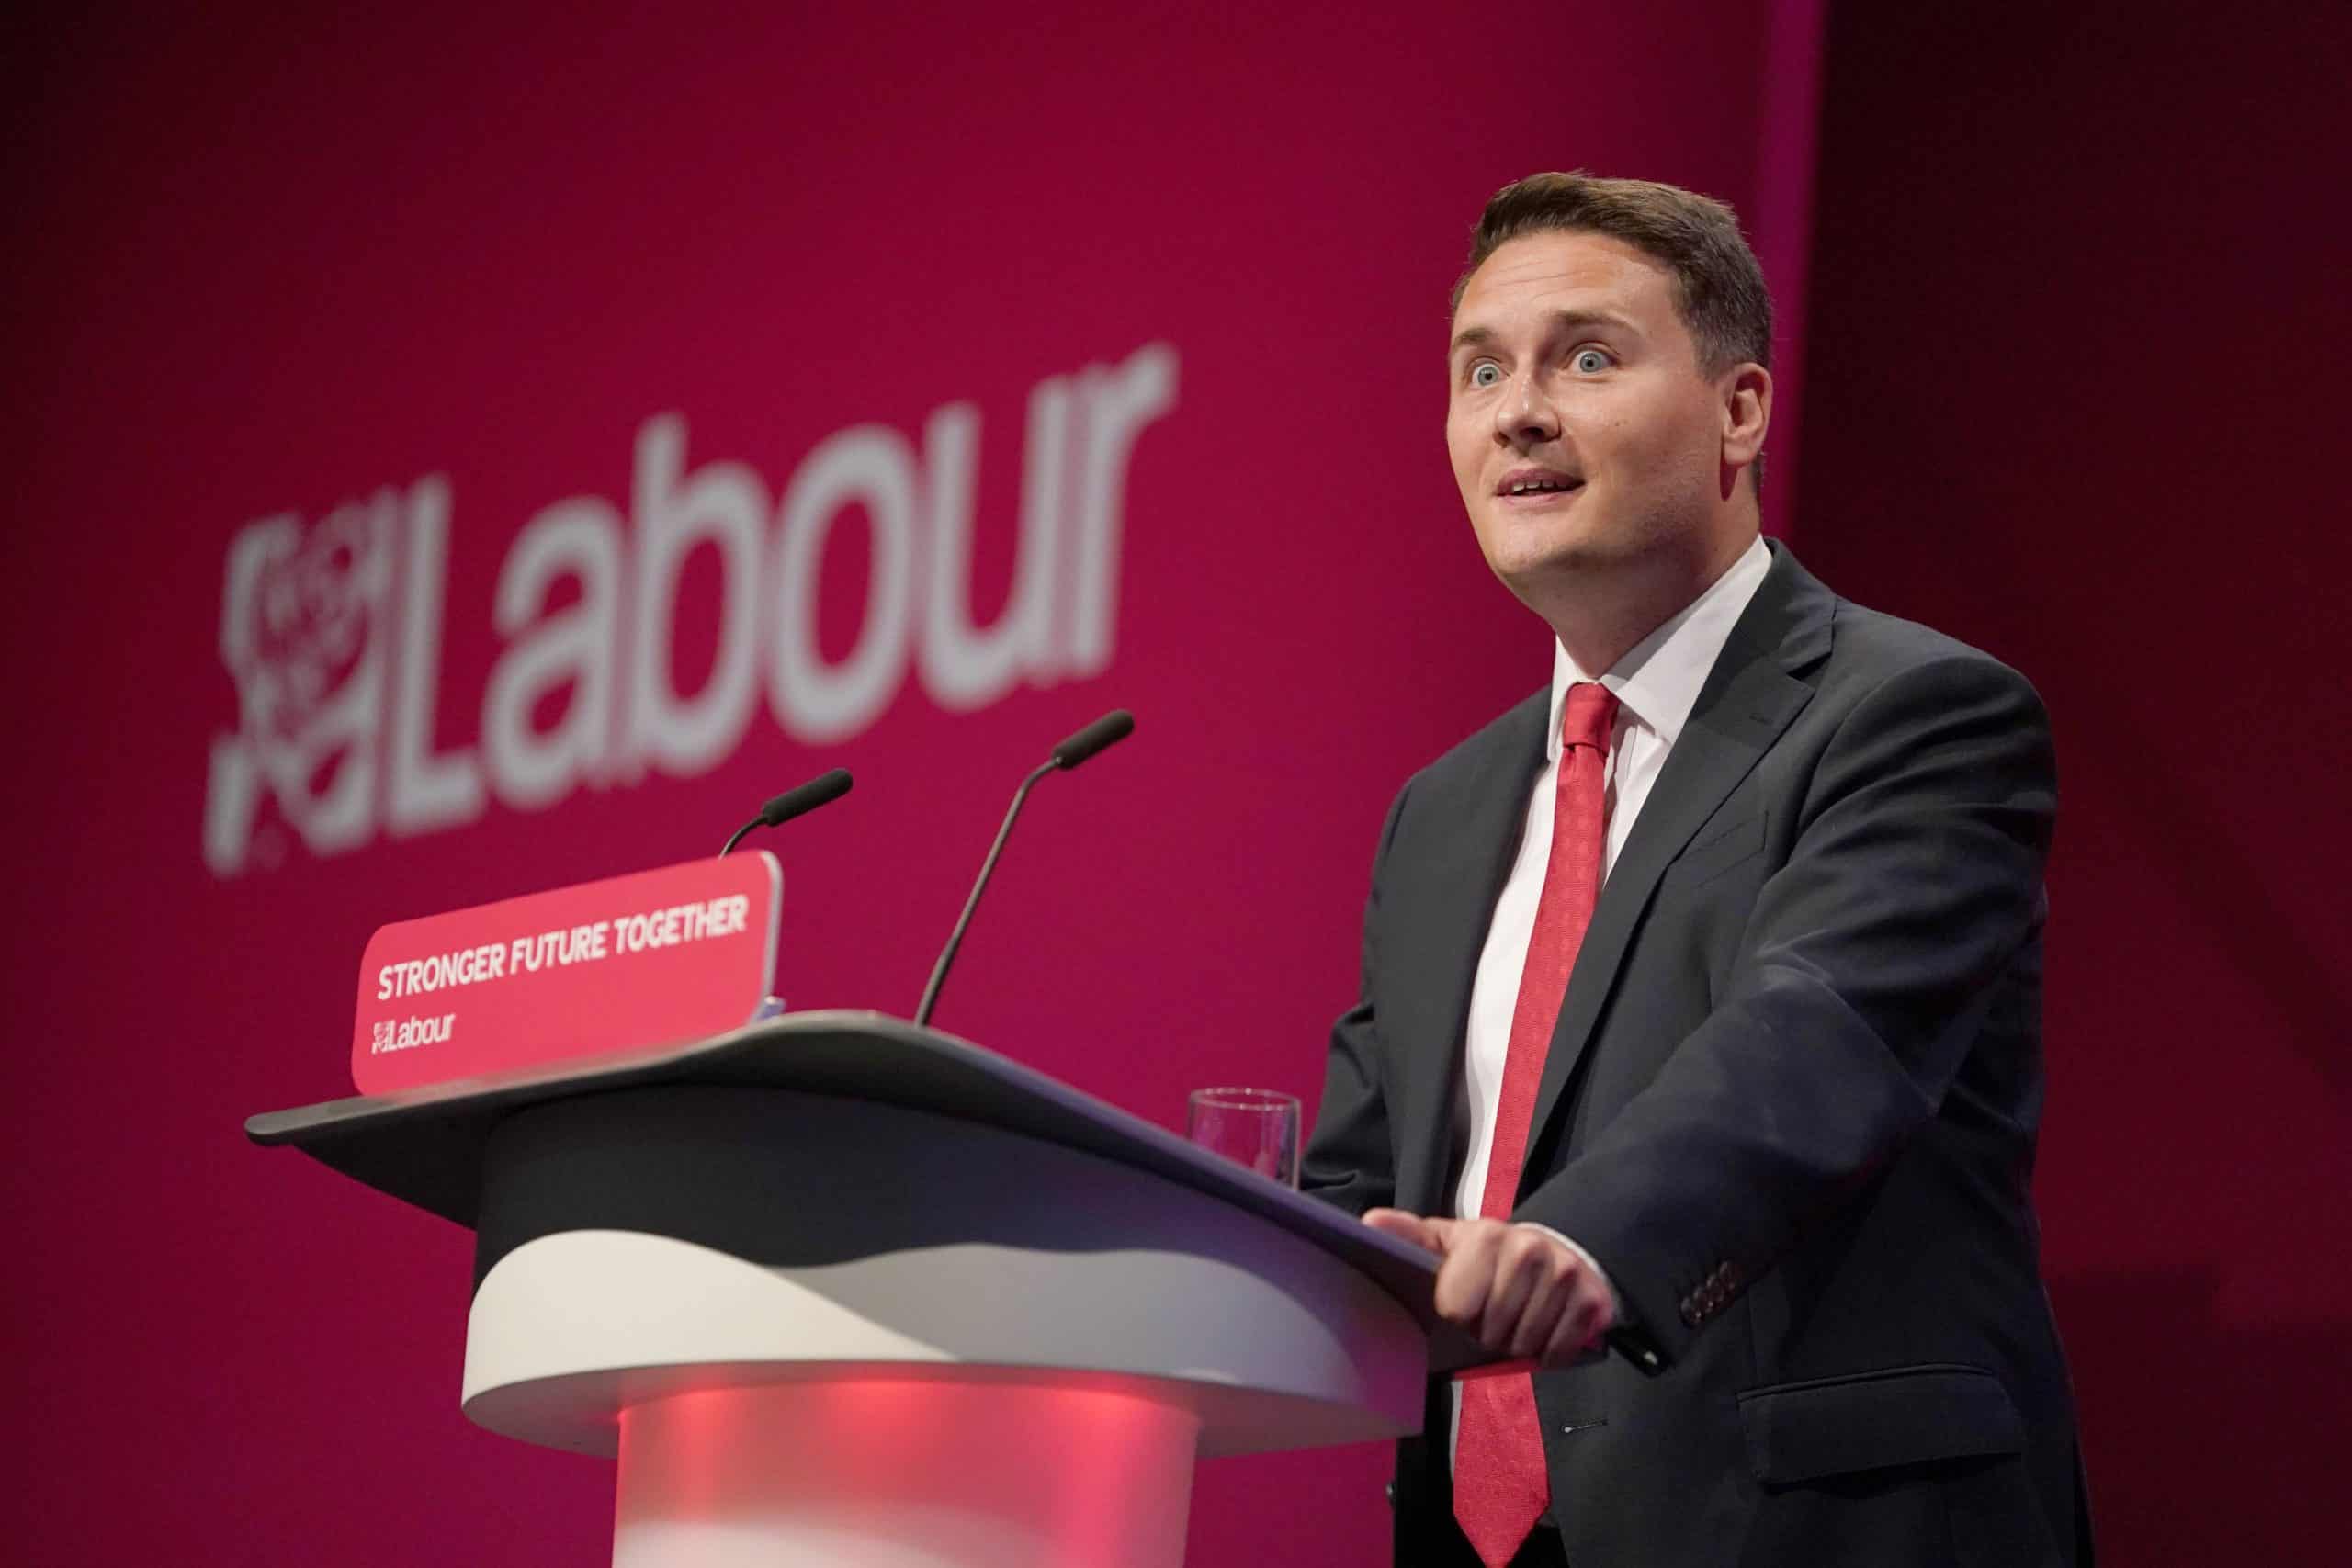 Streeting: Labour would use private providers to cut NHS waiting lists